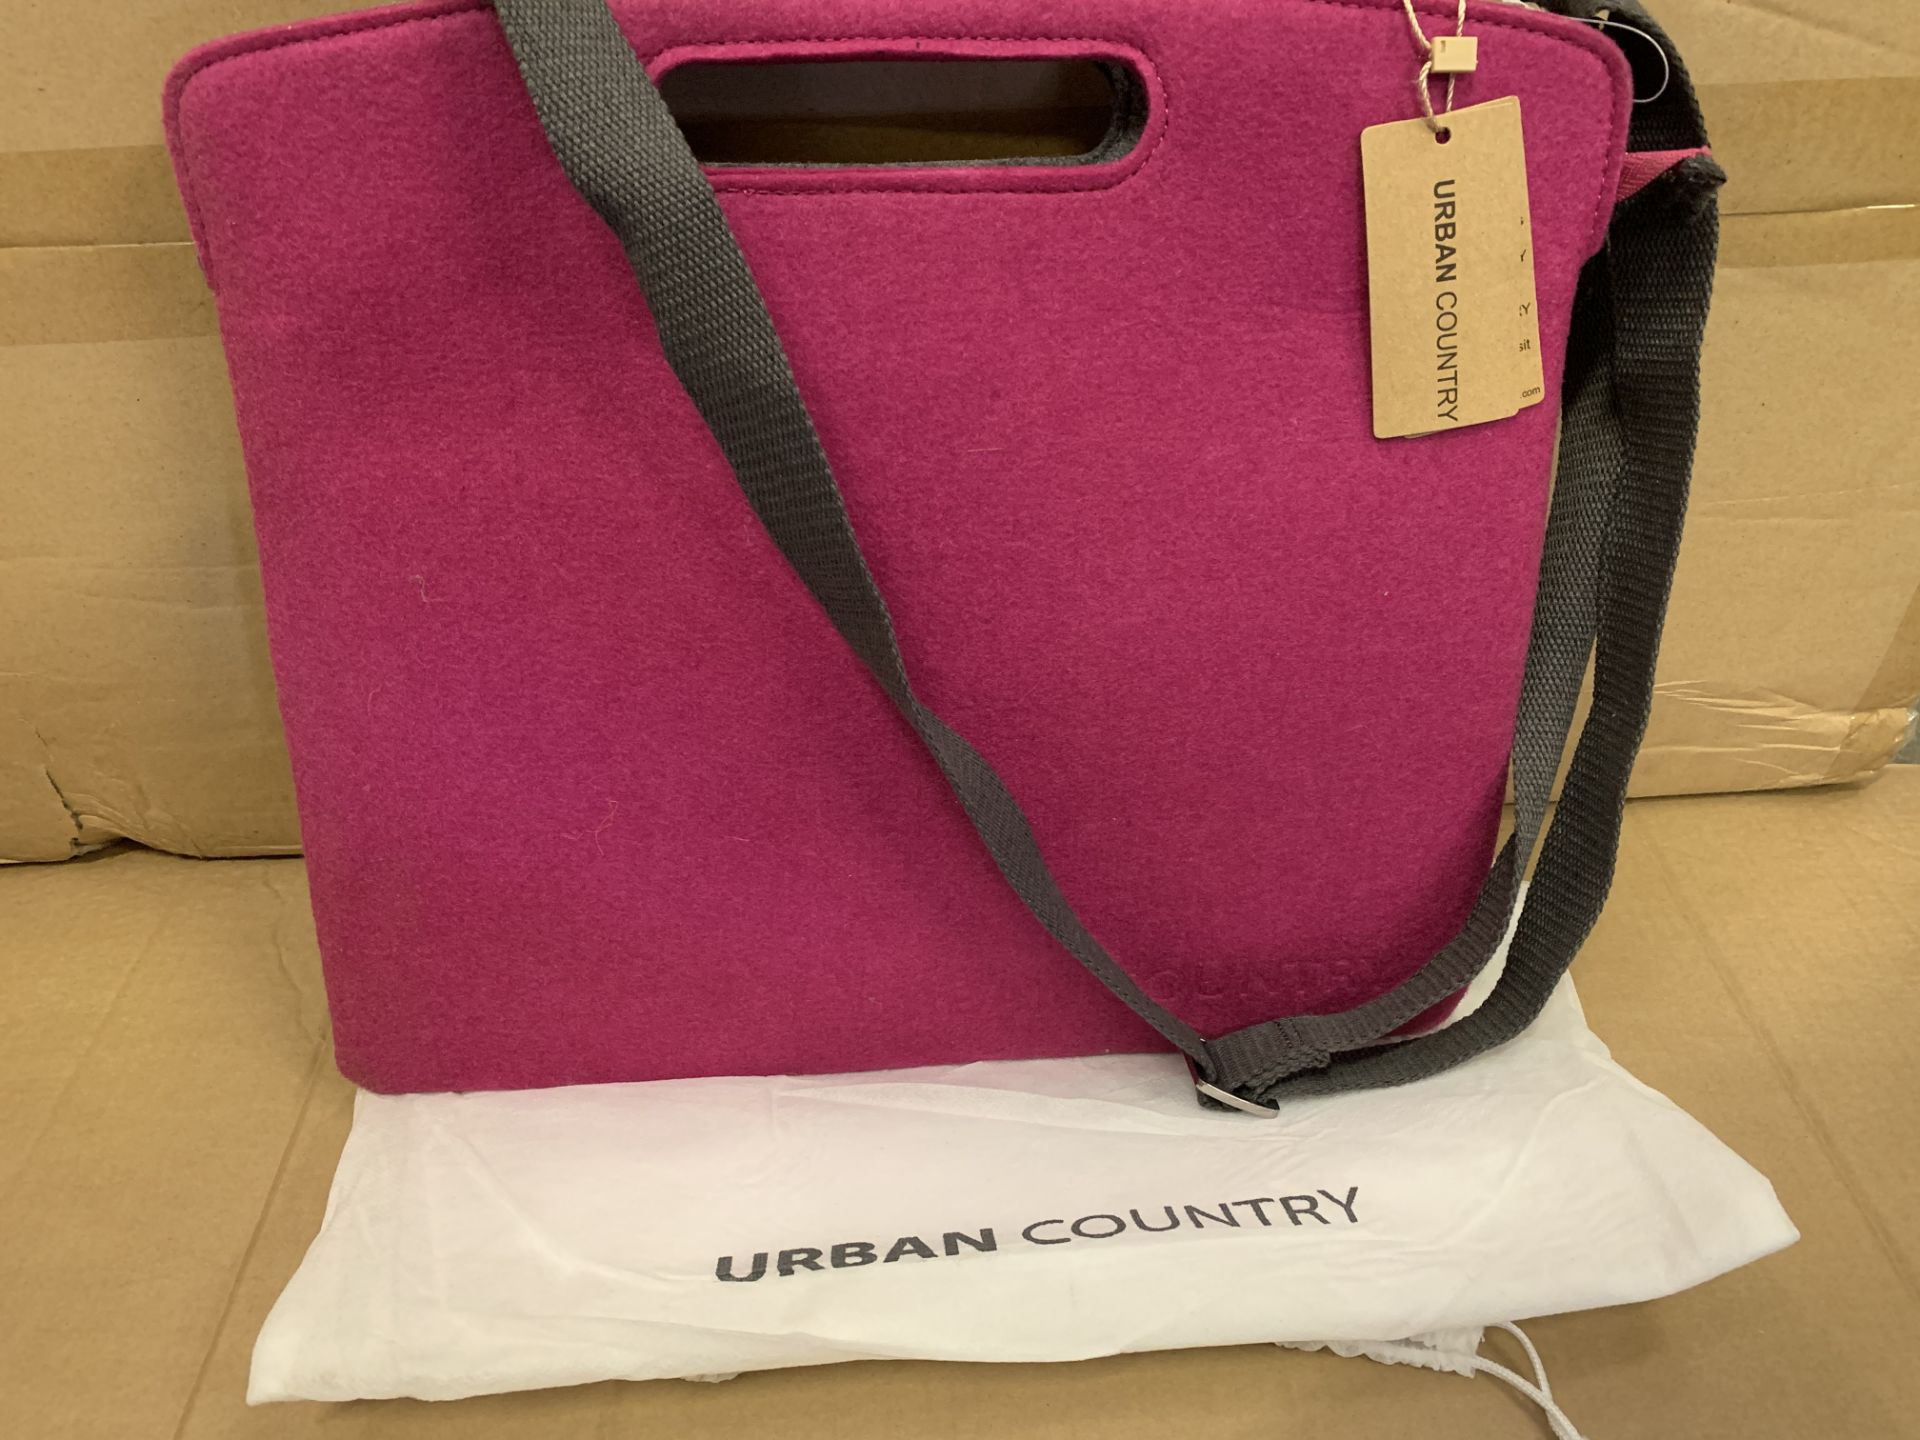 10 X BRAND NEW URBAN COUNTRY PIERCED HANDLE CARRY BAGS PURPLE RRP £41 EACH - Image 2 of 2